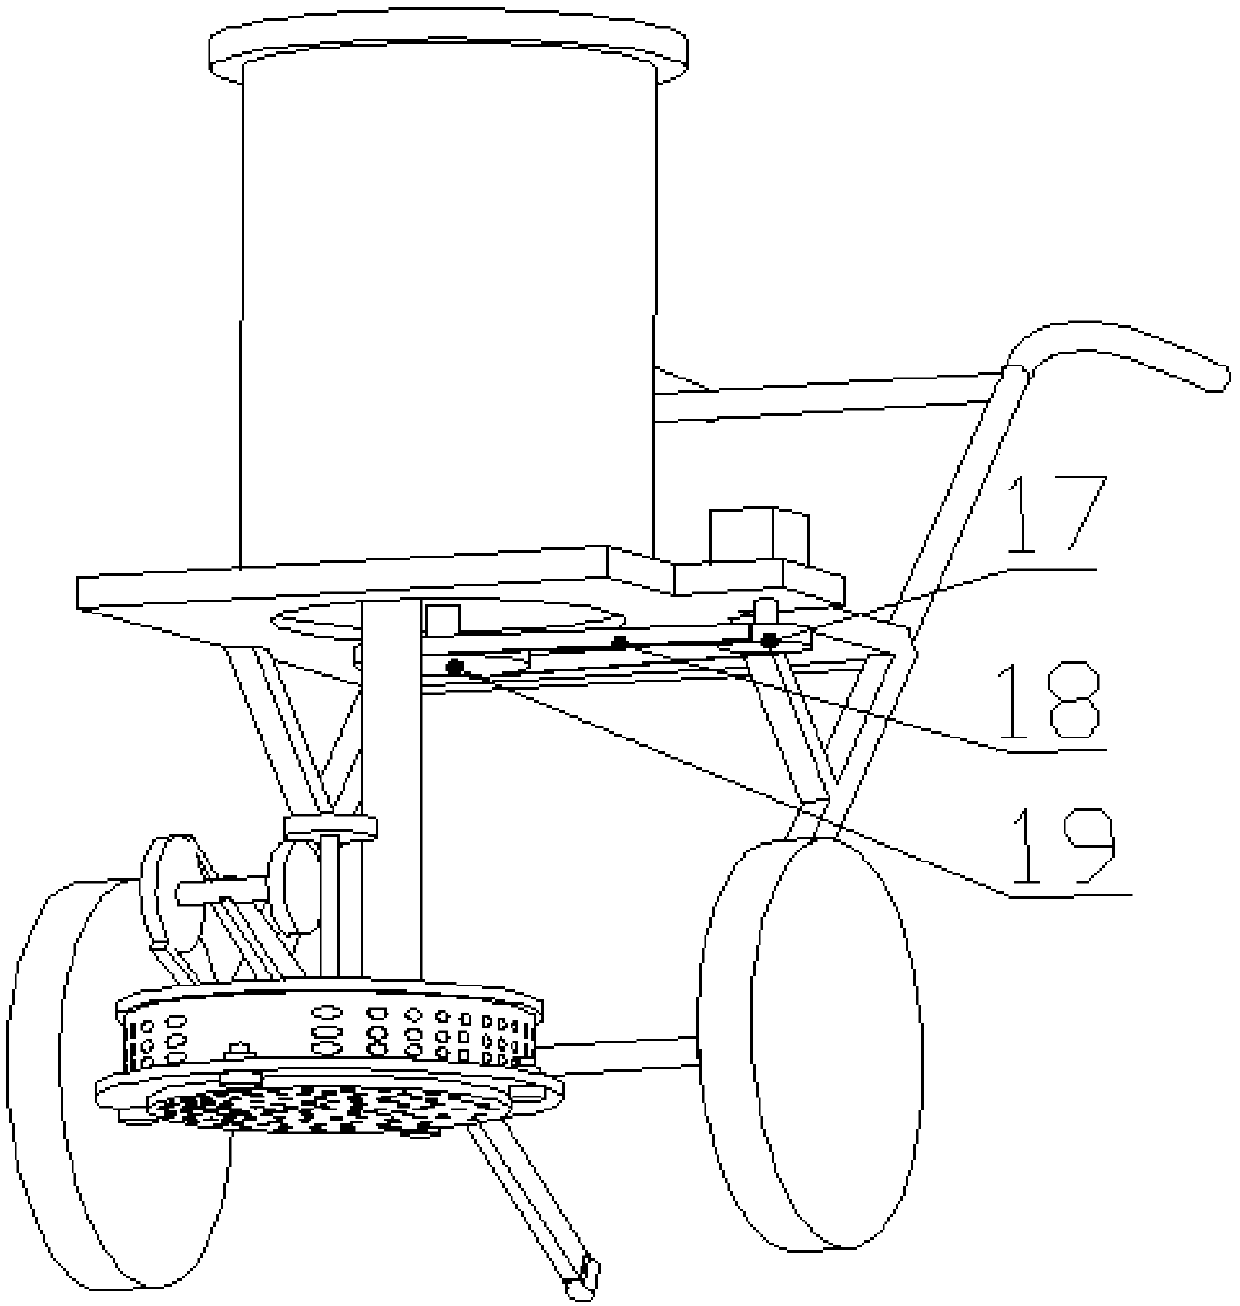 An agricultural centrifugal fertilizer application device